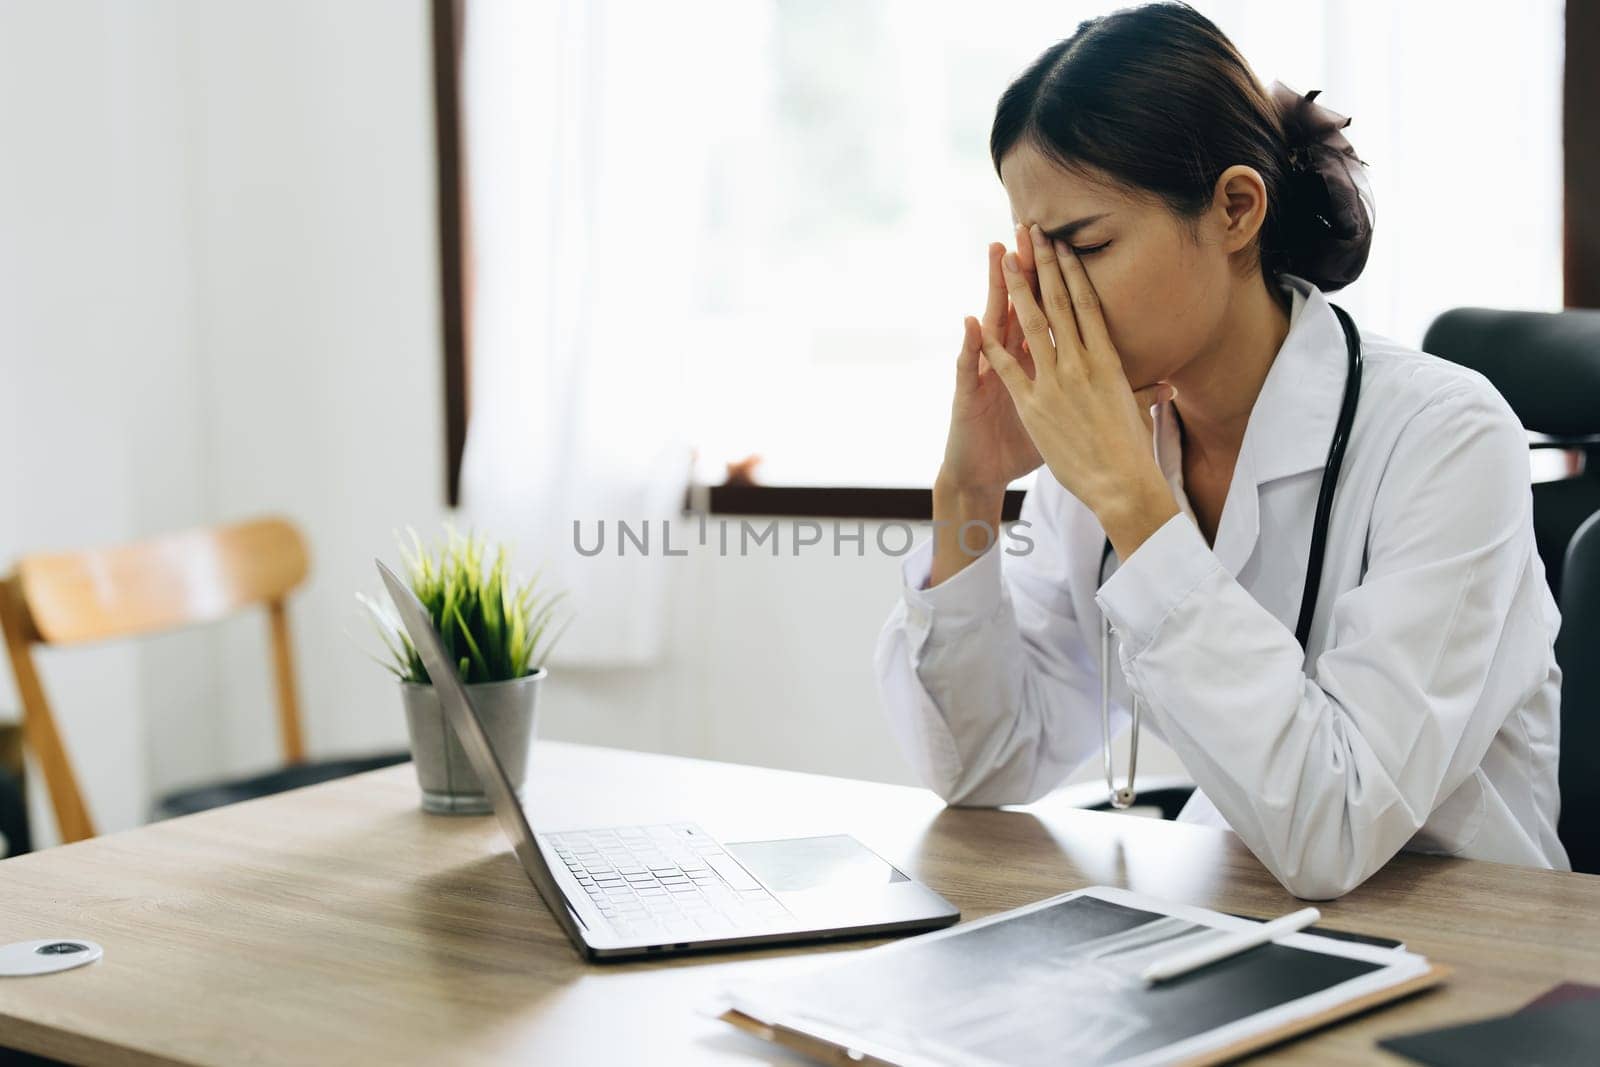 An Asian female doctor uses a computer while showing concern about patient information.